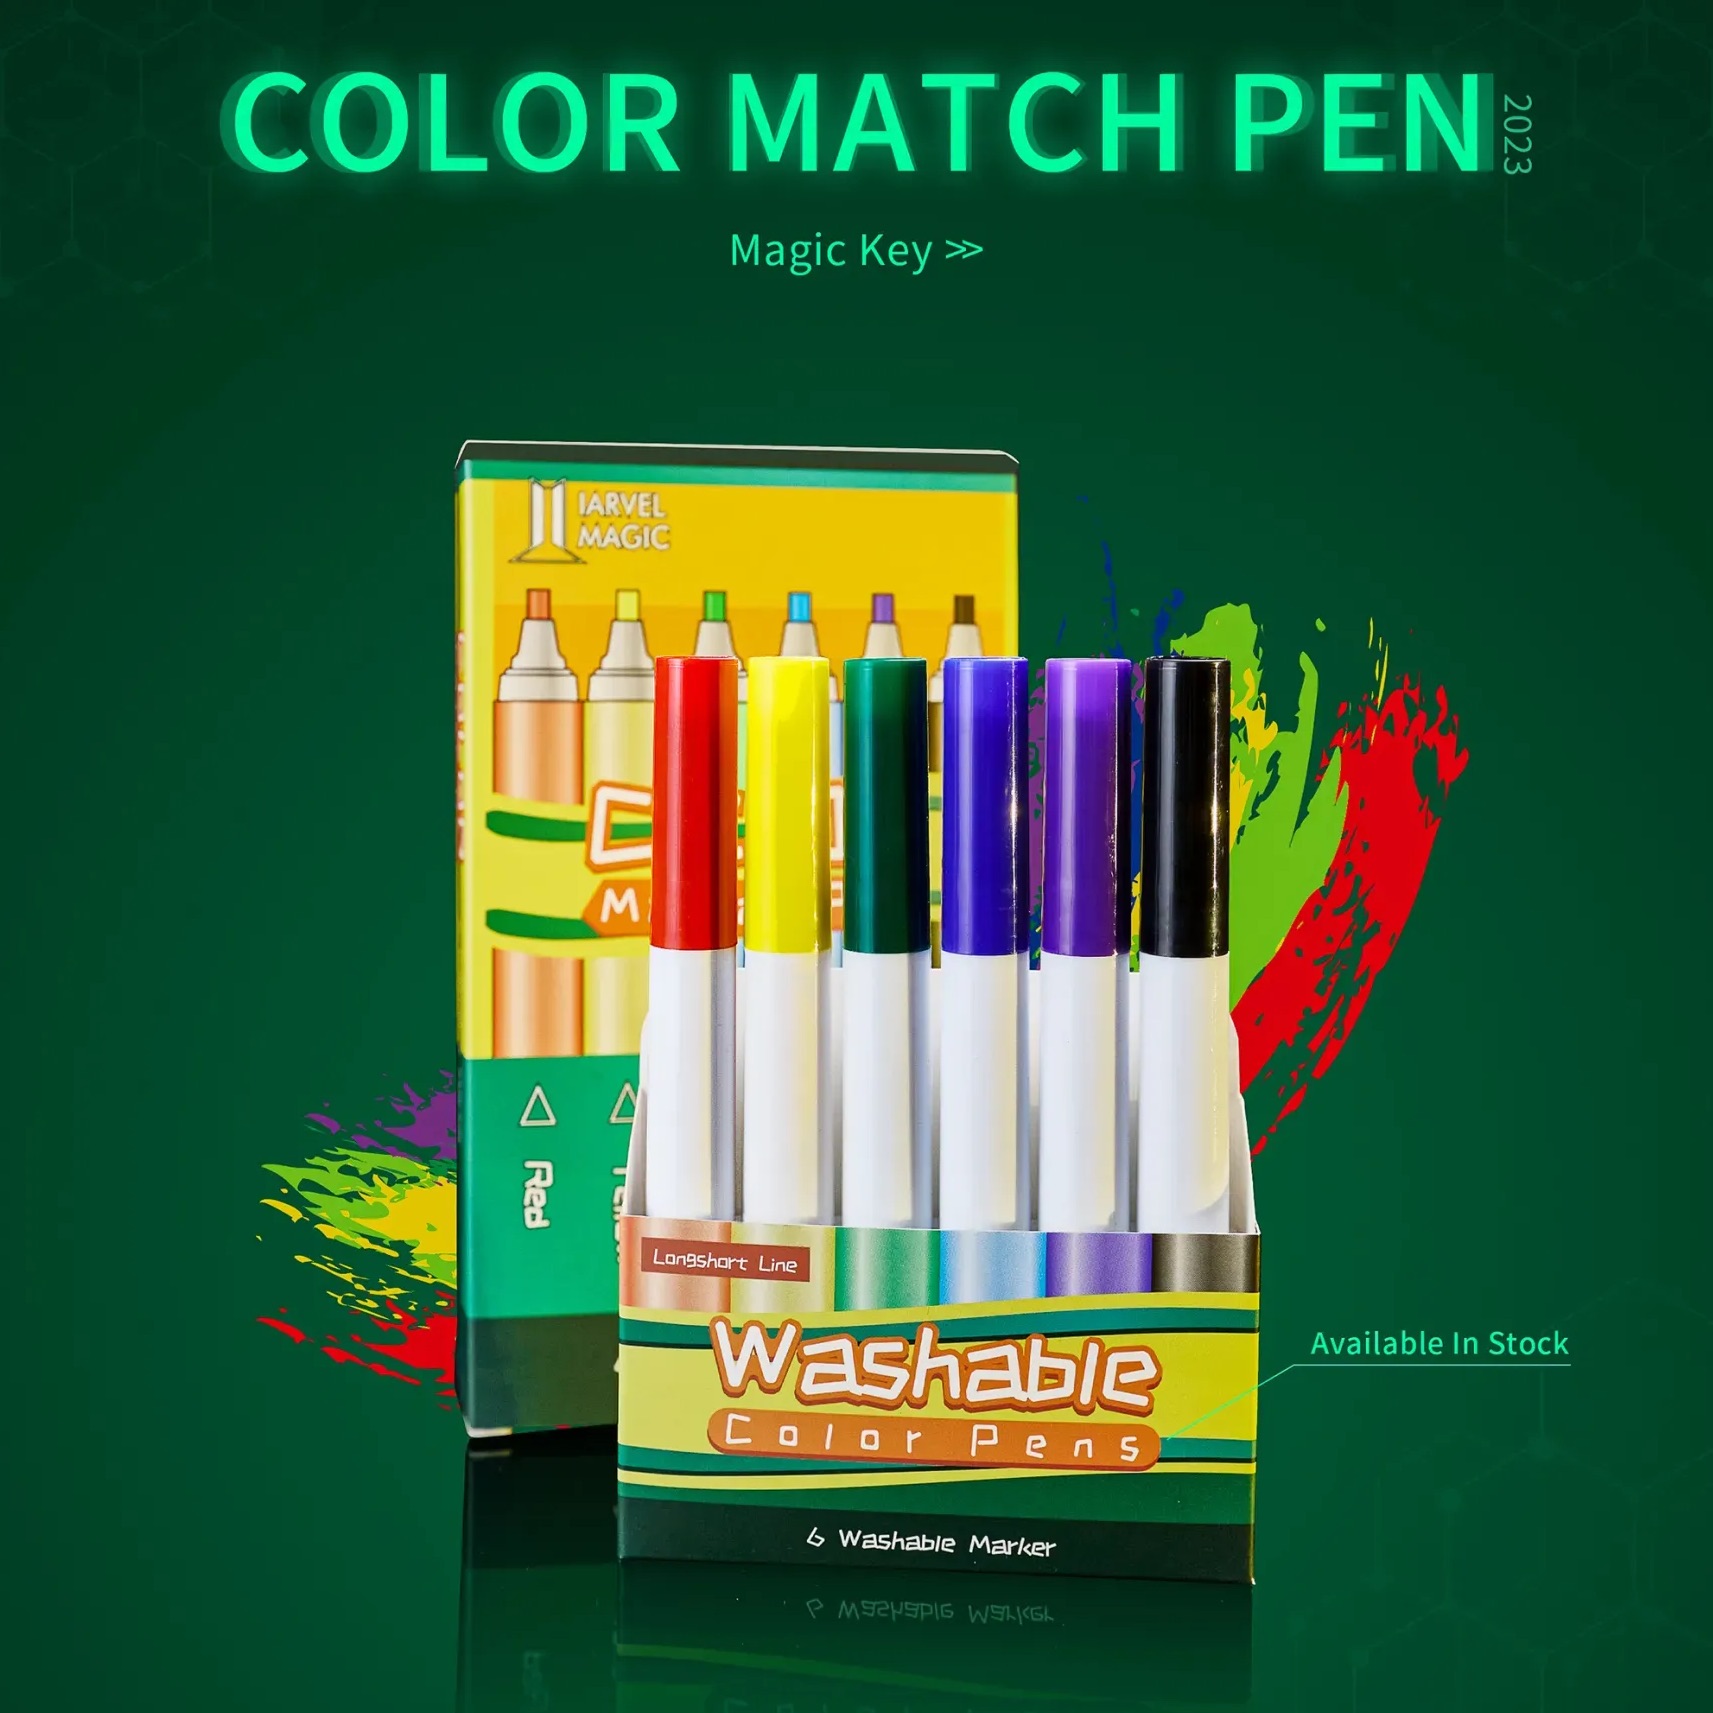 COLOR MATCH PEN BY IARVEL MAGIC-N2G Presents